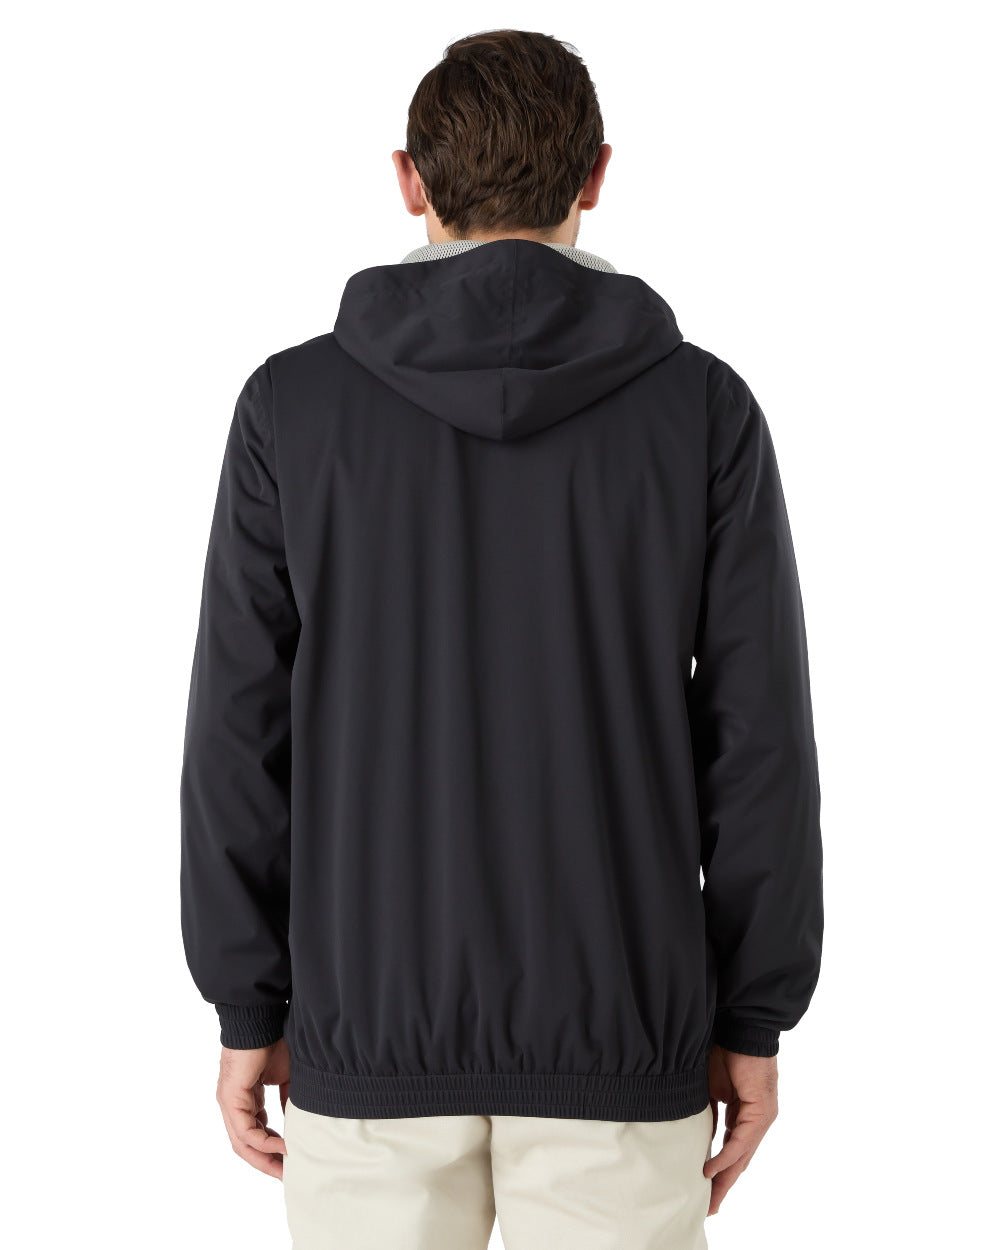 Black Coloured Musto Mens Active Rain Jacket On A White Background 